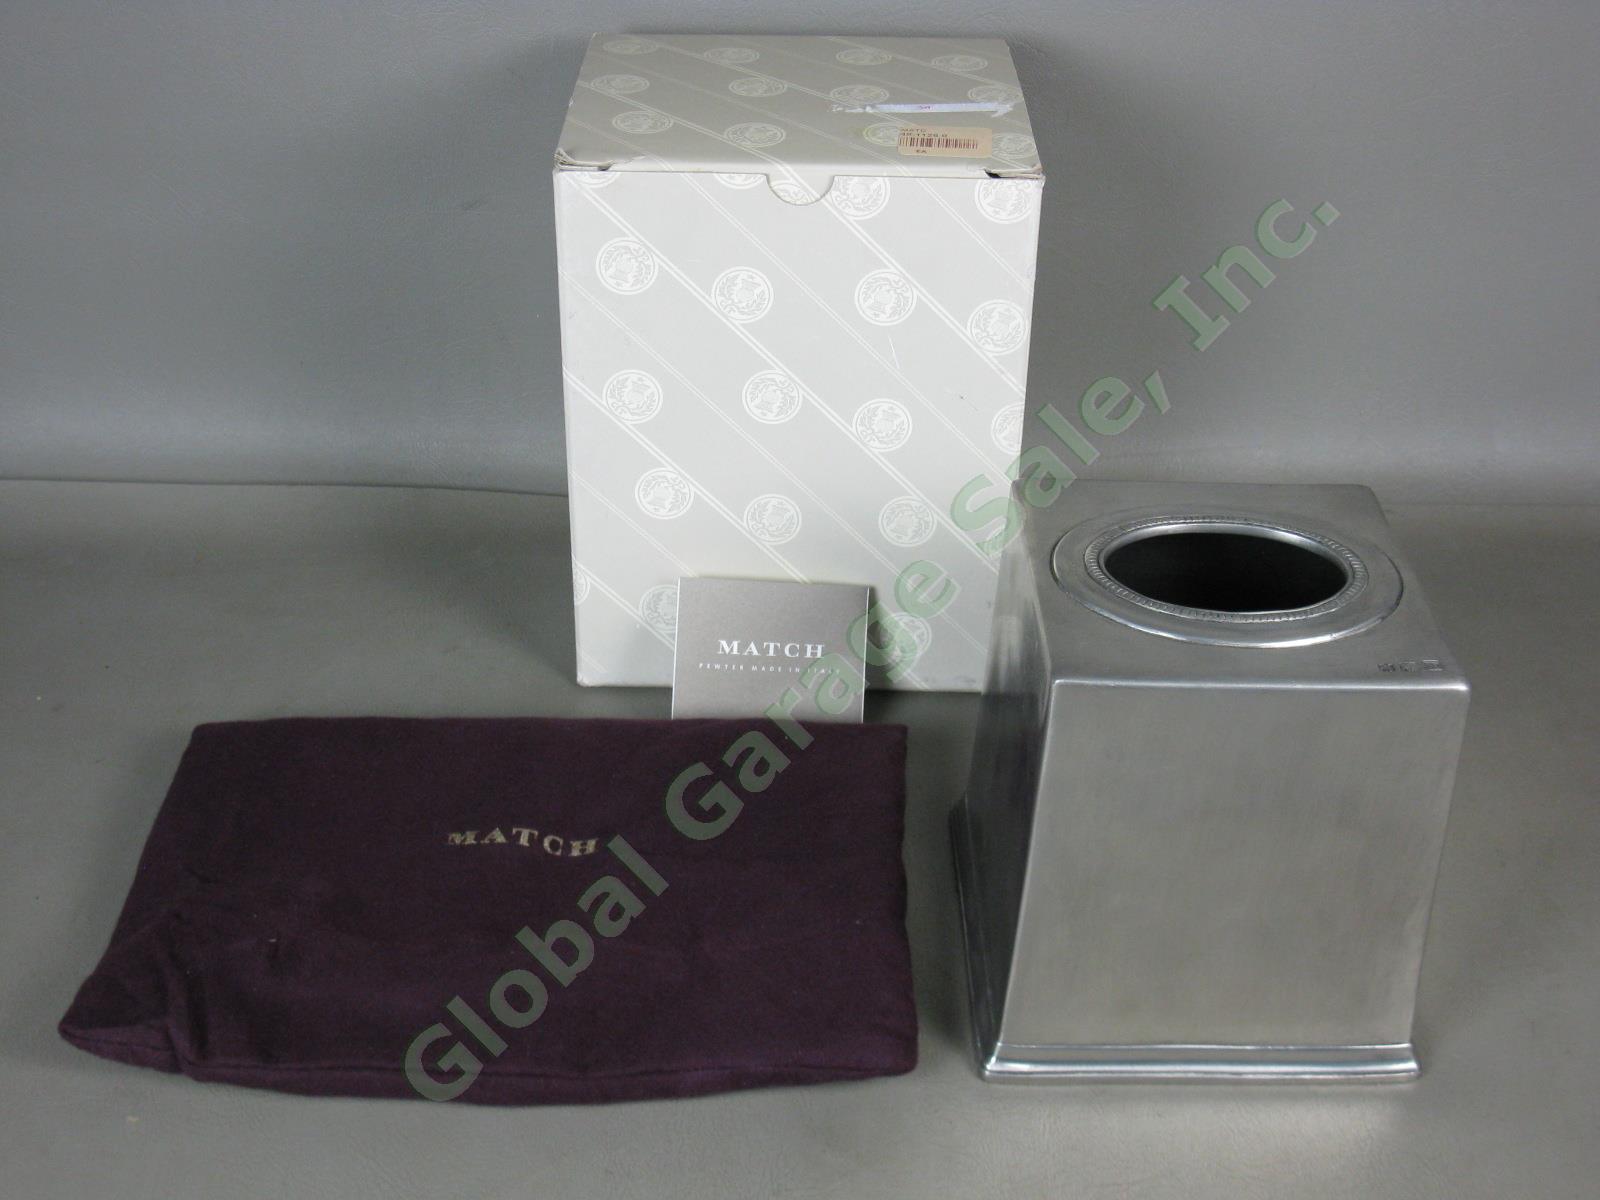 NEW Match Pewter Square Tissue Box Cover Holder Handmade In Italy Retail $280 NR